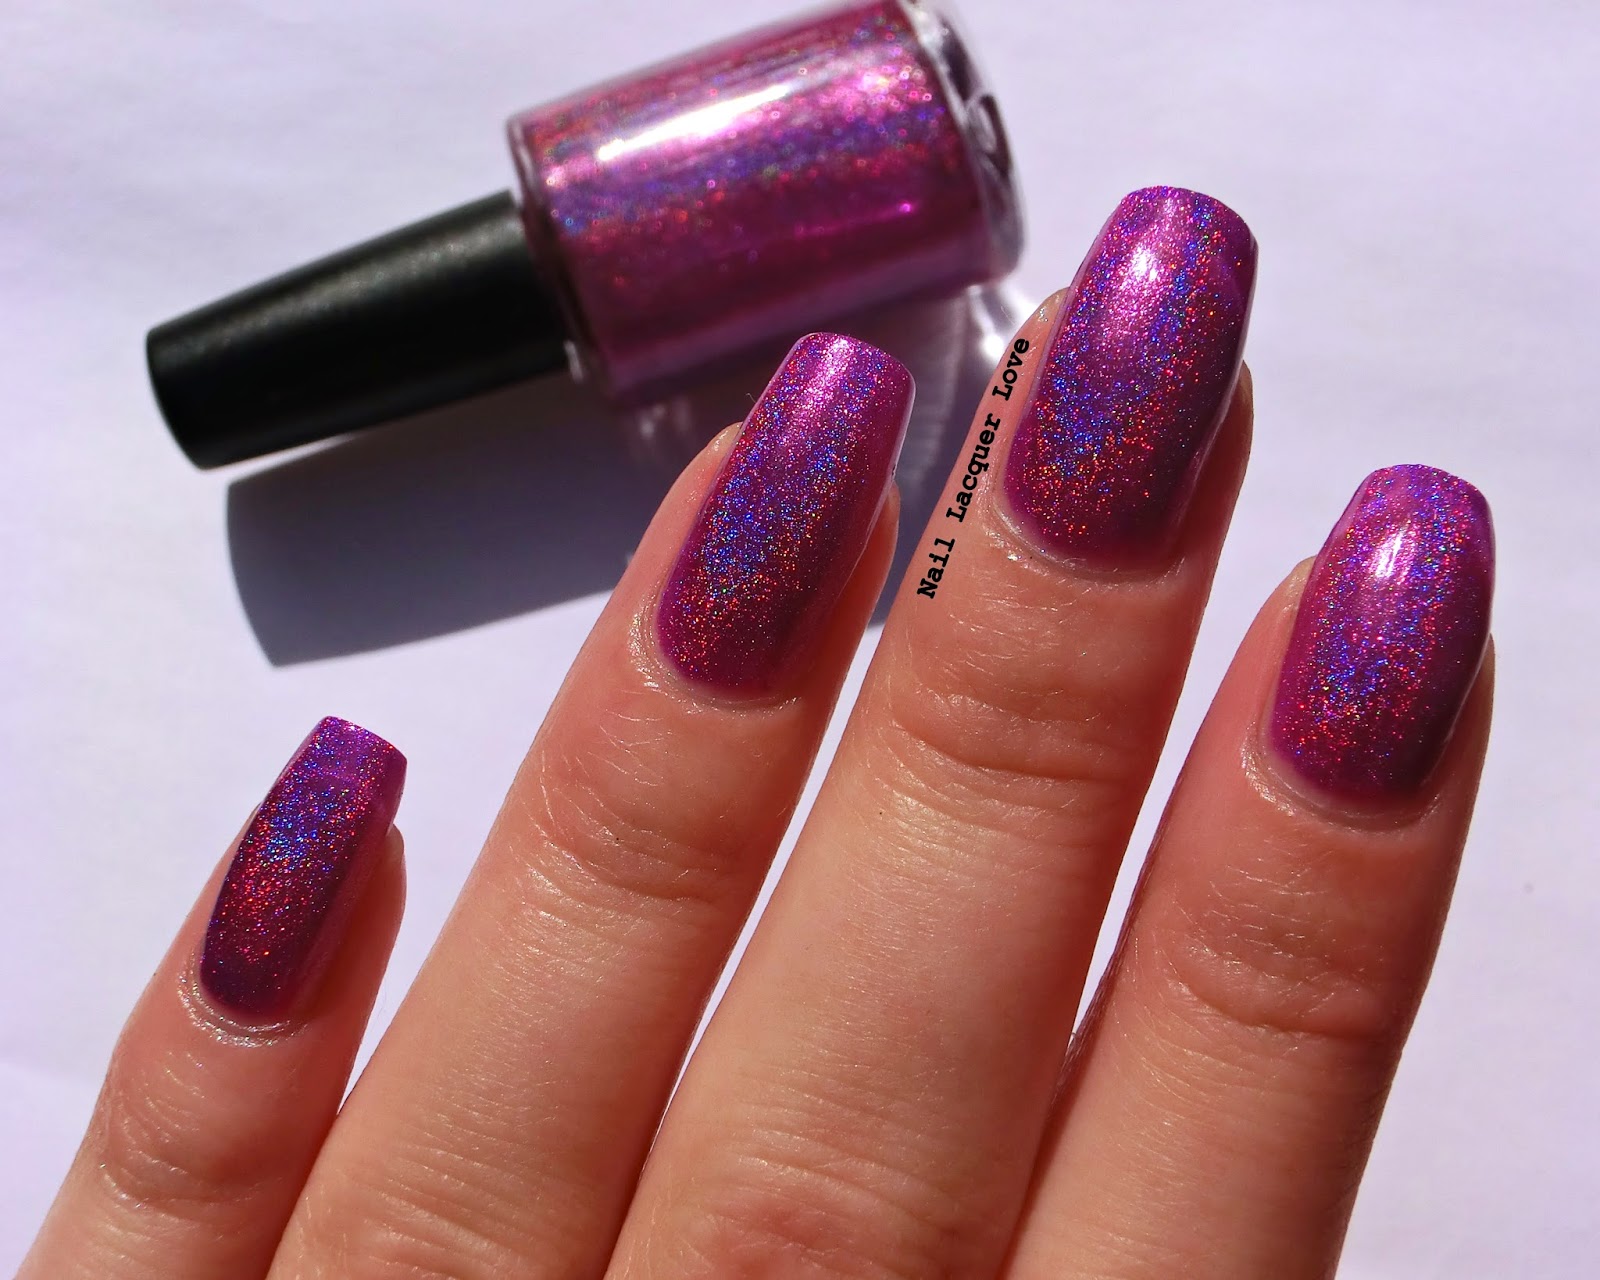 3. Radiant Orchid Nail Lacquer - wide 8